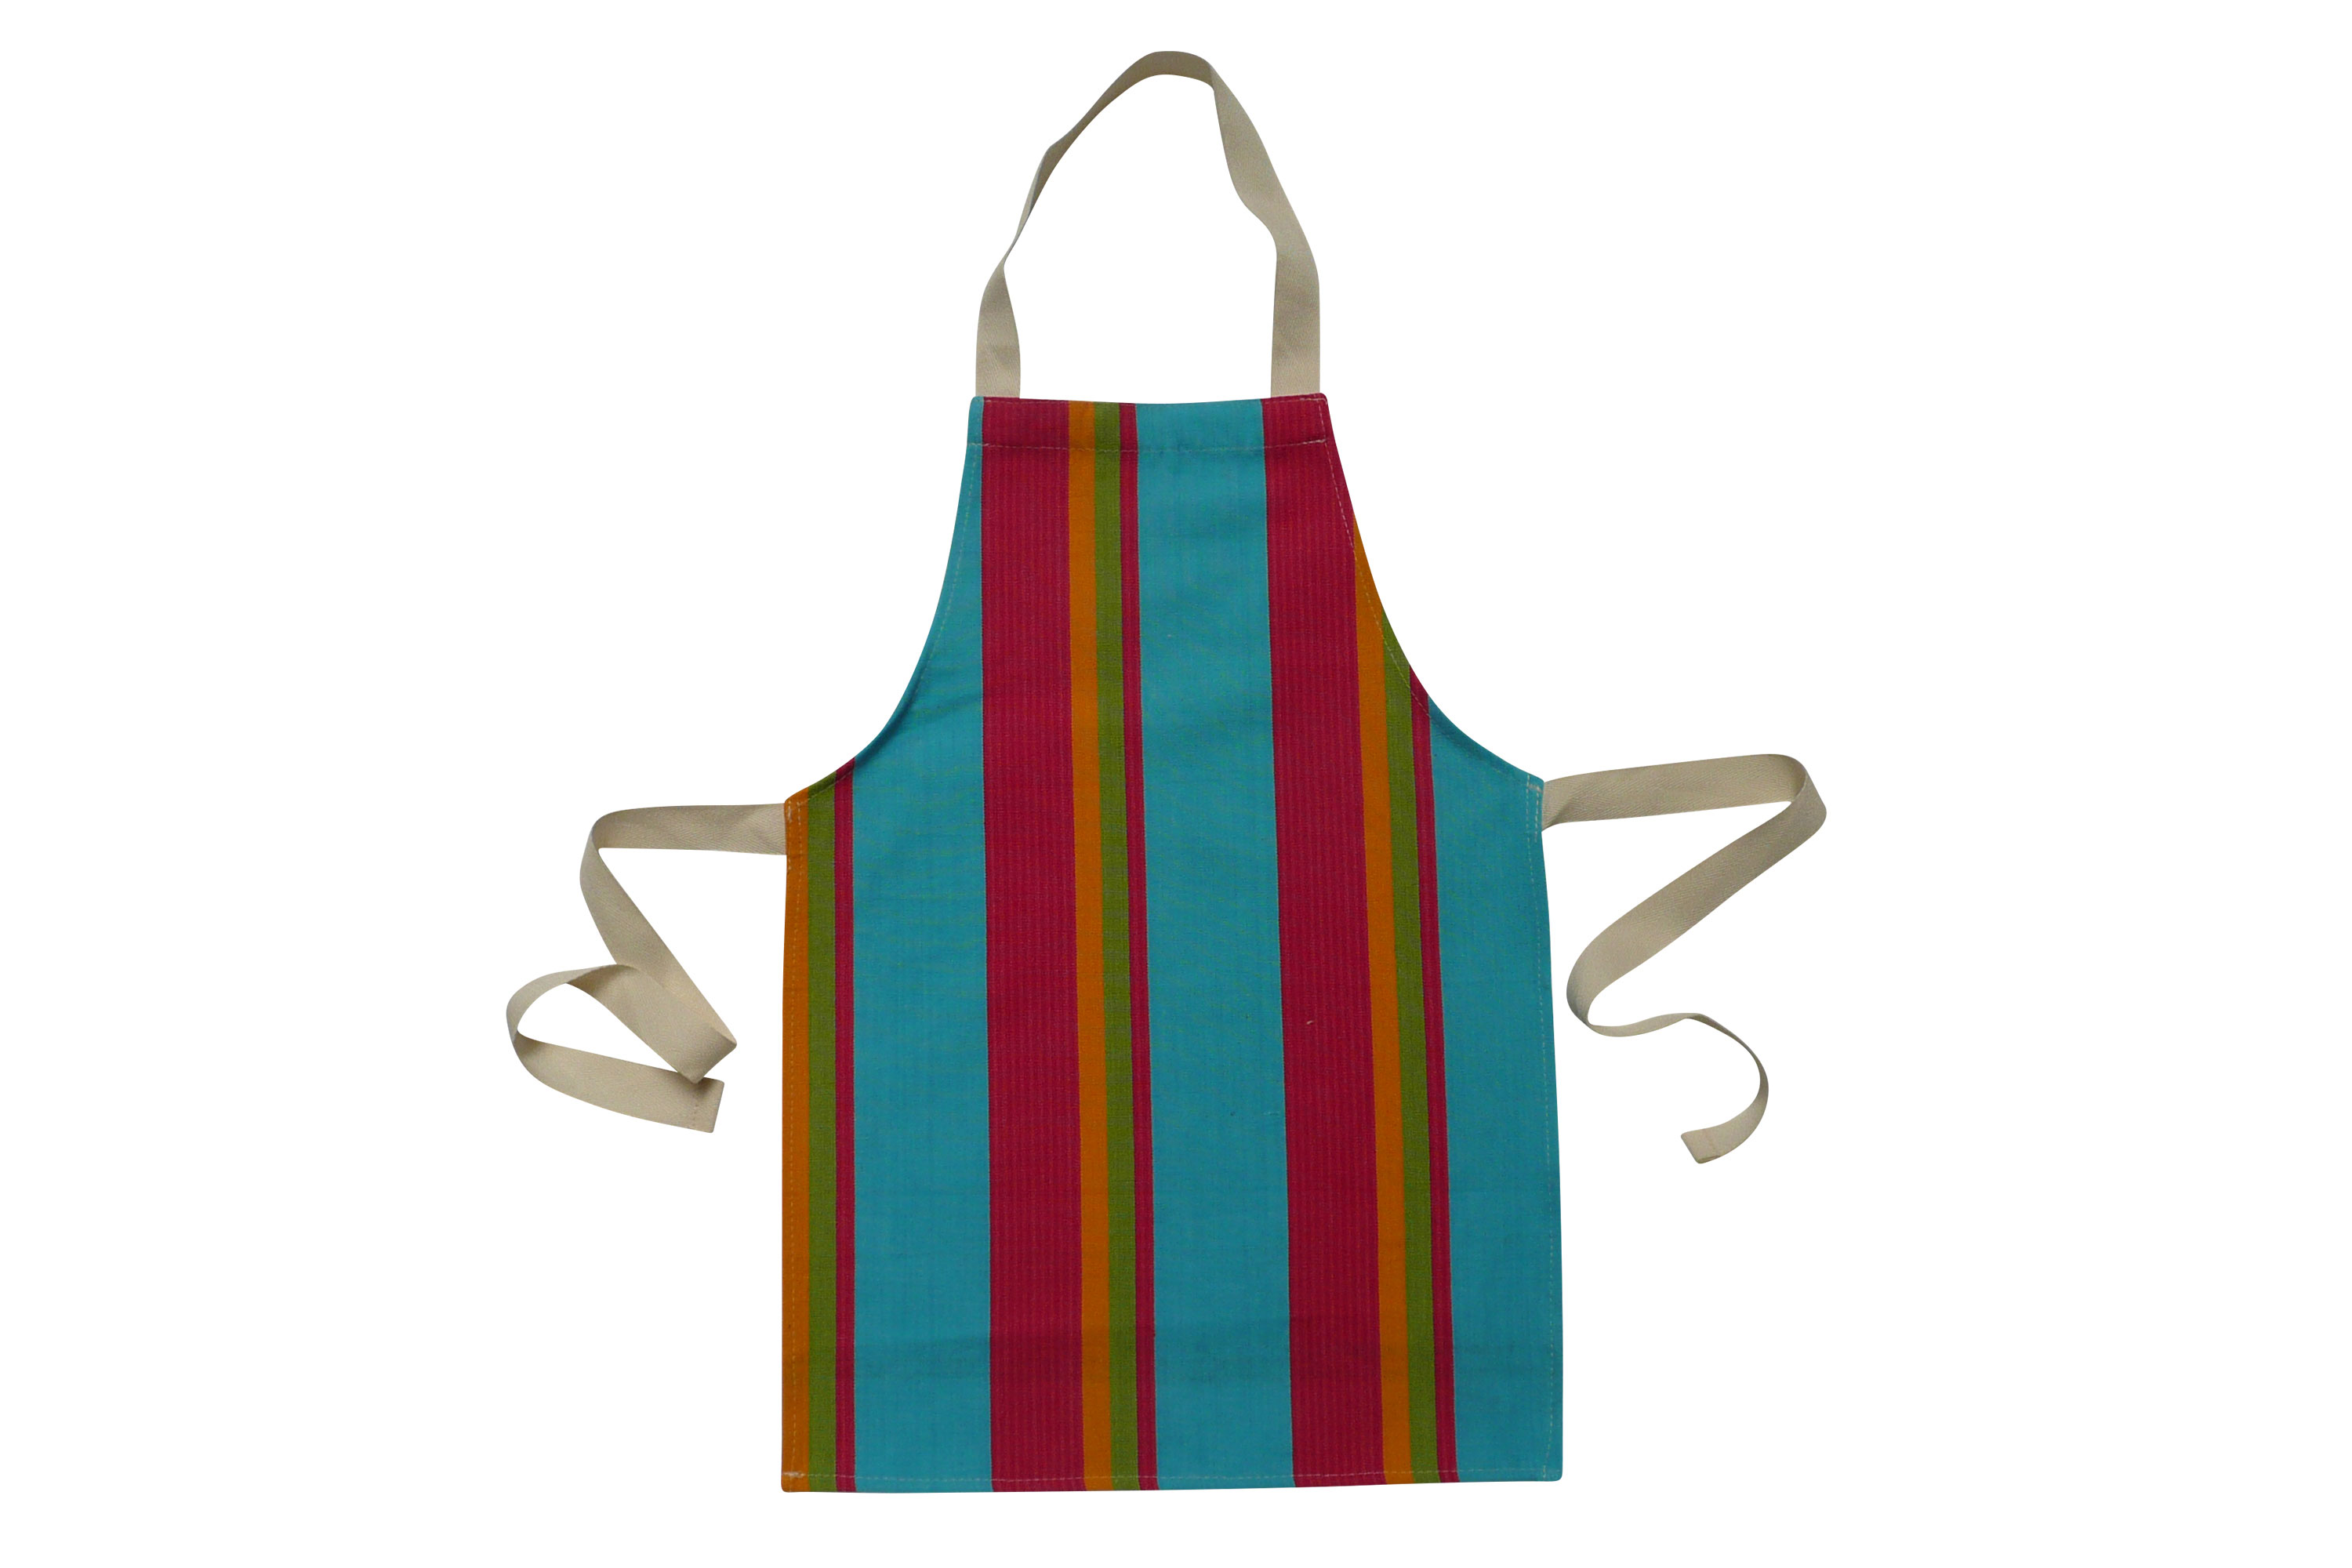 Toddlers Aprons - Striped Aprons For Small Childrenpink, turquoise, yellow   